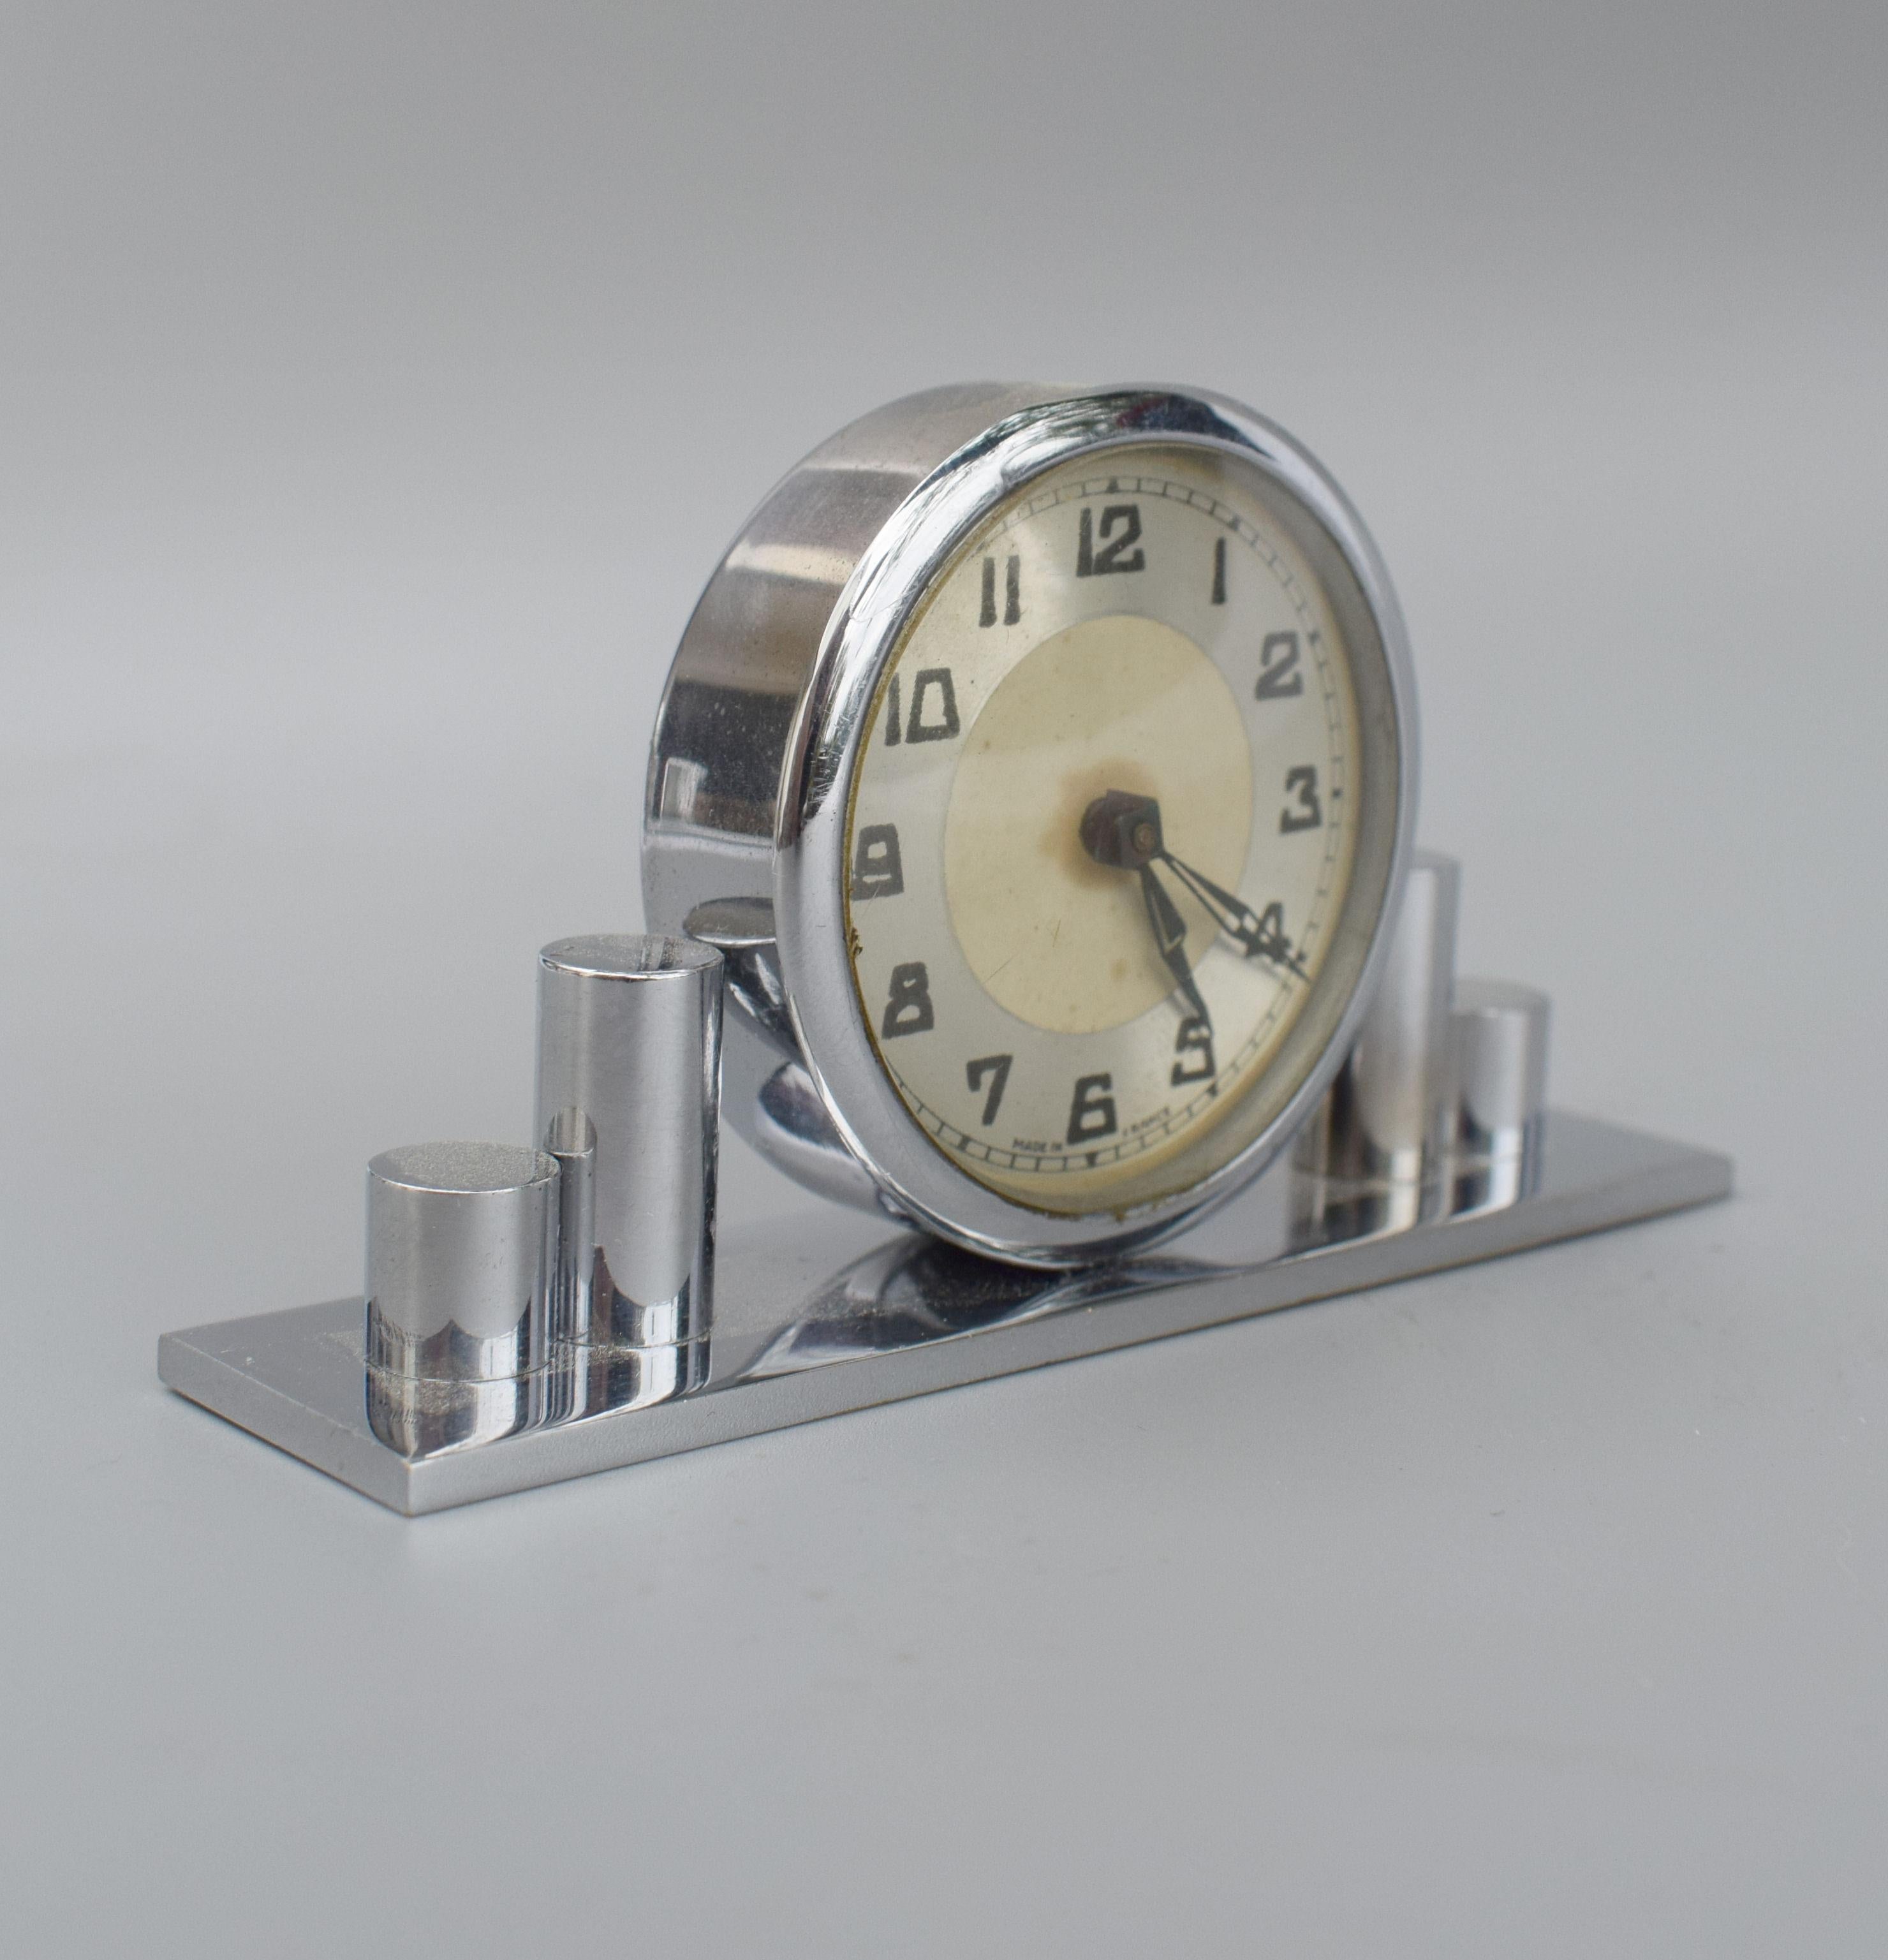 This clock can't be mistaken for any other era can it? Sweet little desk top clock with the case in Classic Art Deco geometric skyscraper shape and stylized Art Deco numerals. The clock face is marked to the very edge 'Made in France'. Condition is